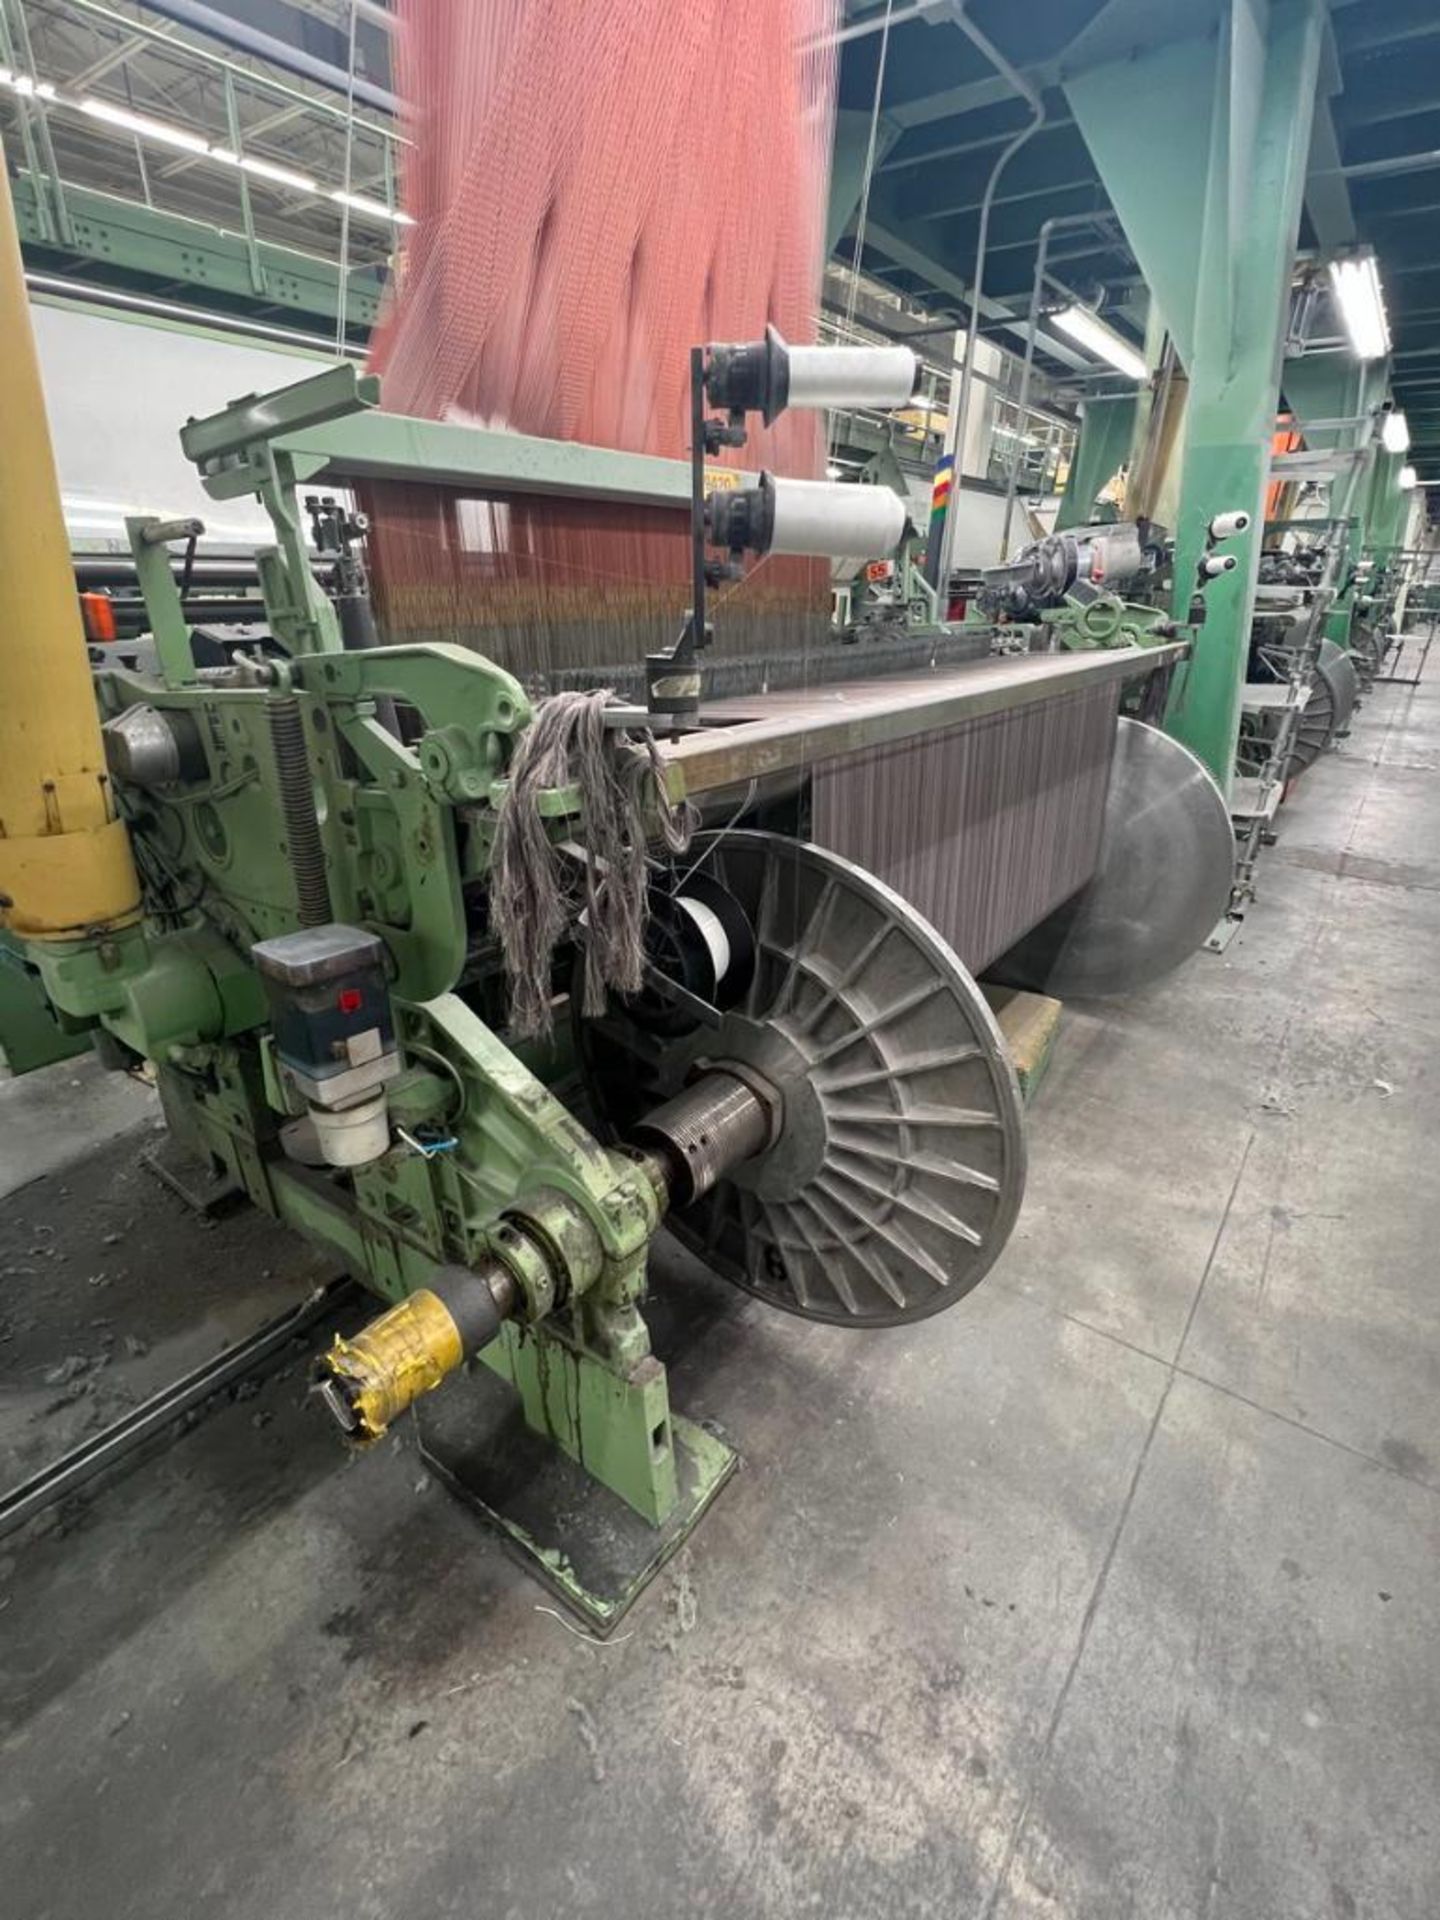 1997 Dornier 210 cm Jacquard Rapier Loom, Model HTVS 8/J, S/N 38461 - Equipped with 6 Colors, 4 Feed - Image 4 of 13